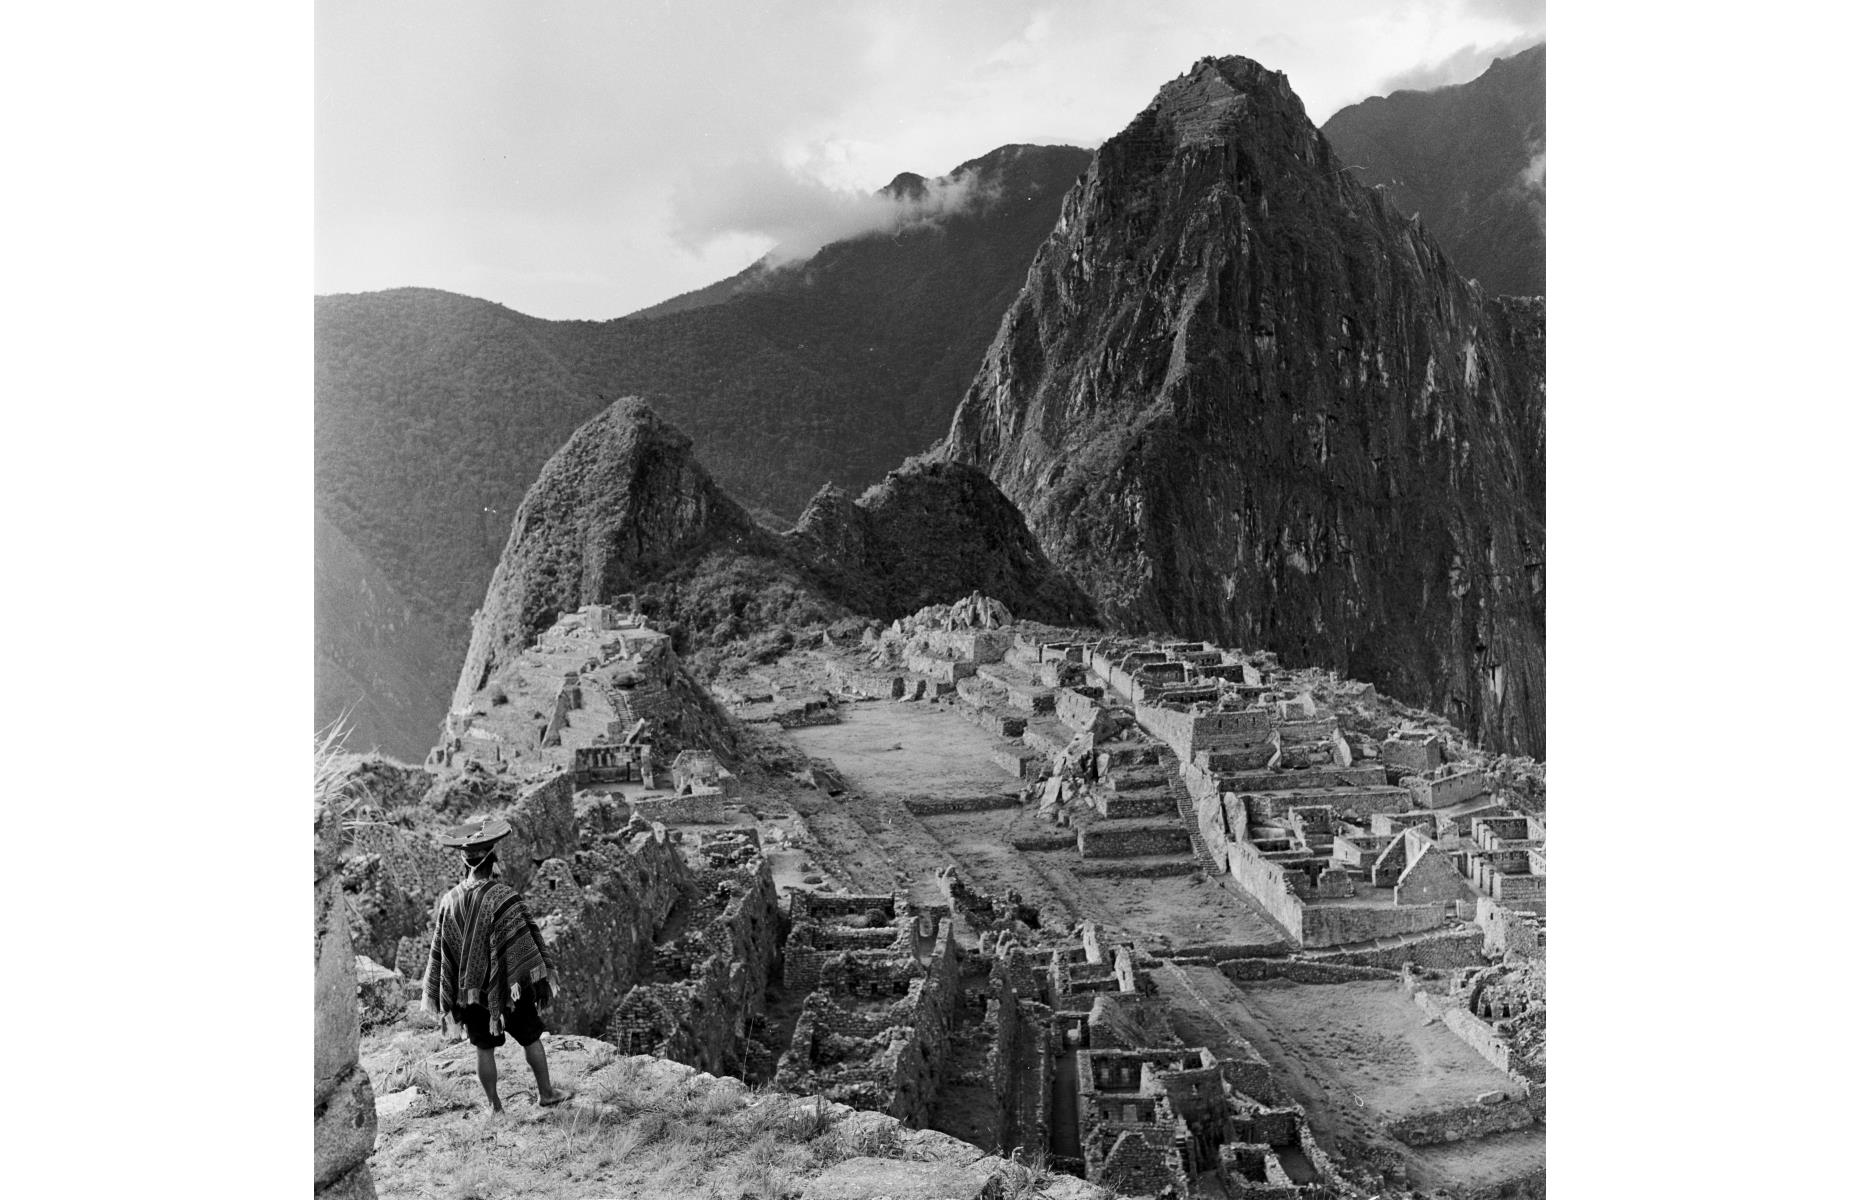 <p>A well-preserved citadel dating back to the Inca Empire which ruled over western South America in the 15<sup>th</sup> and 16<sup>th</sup> centuries, Machu Picchu is located around 50 miles (80km) northwest of Cuzco, between the peaks of its namesake and Huayna Picchu. It became well-known to the Western world when American archaeologist Hiram Bingham and his team began digging there in 1911, after which Bingham published a book, <em>The Lost City of the Incas</em>, which led tourists to flock to the Inca Trail. Pictured here in the mid-1950s, a Peruvian Indian man in traditional dress gazes out at the view.</p>